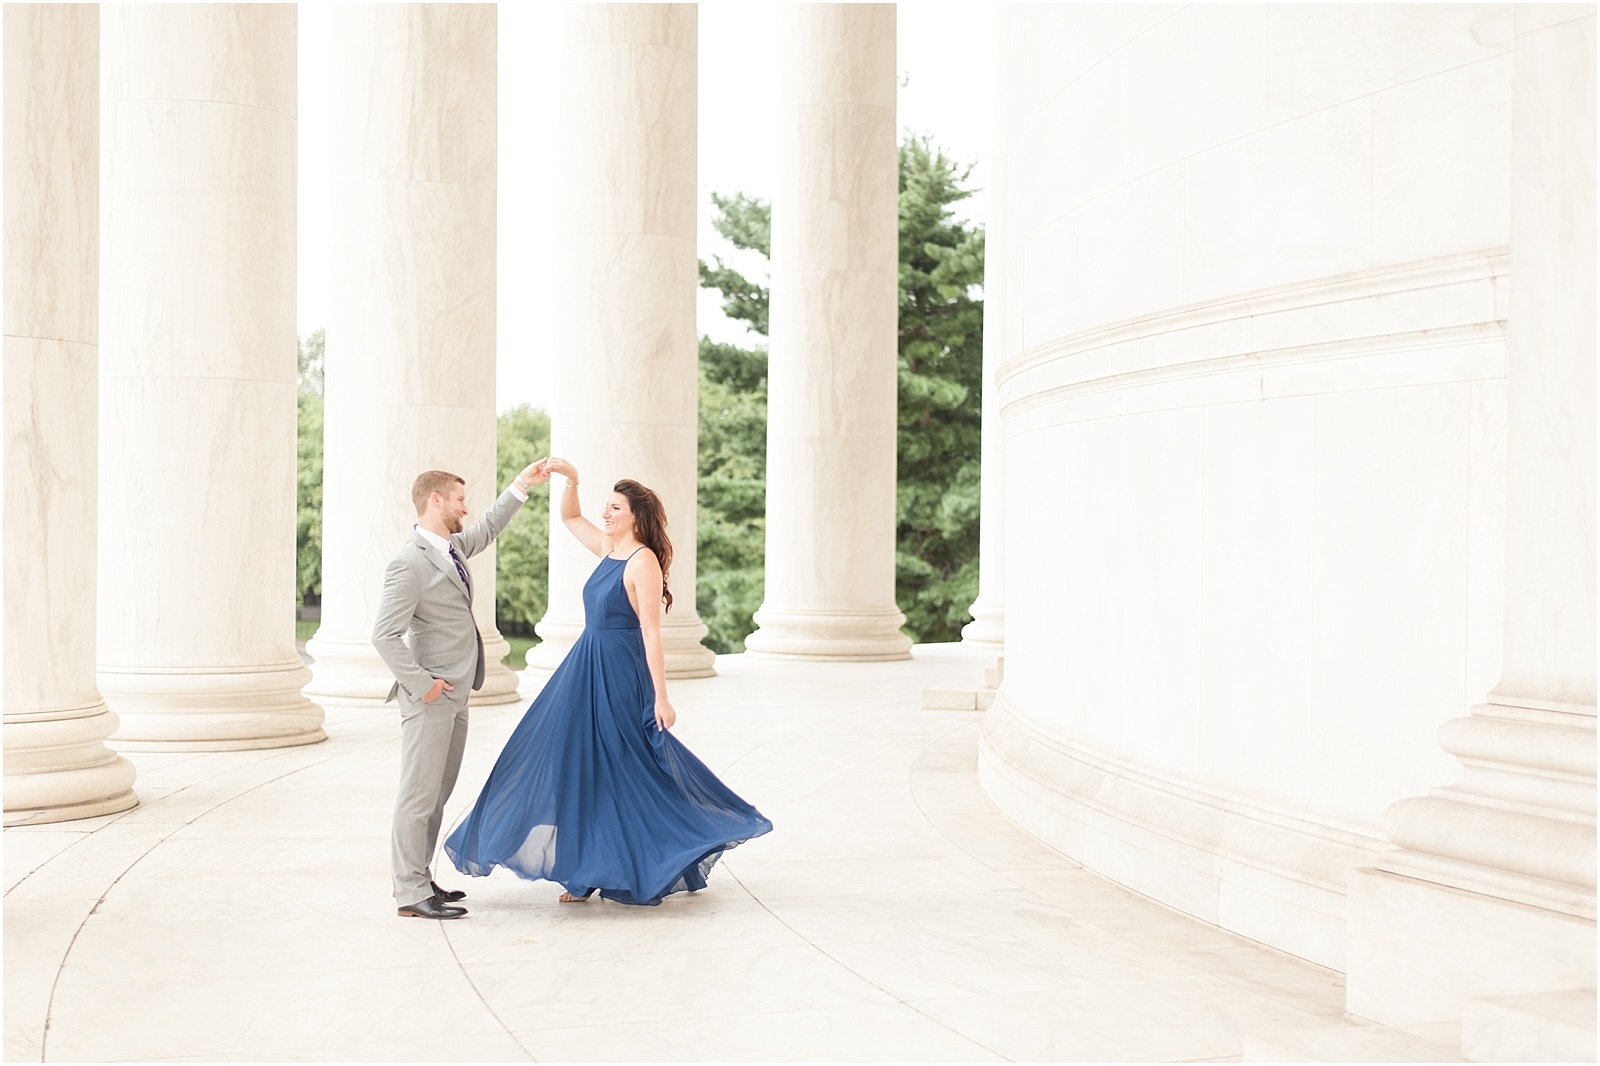 0017 Bret and Brandie Photography| Washington DC Engagement | Megan and Connor.jpg